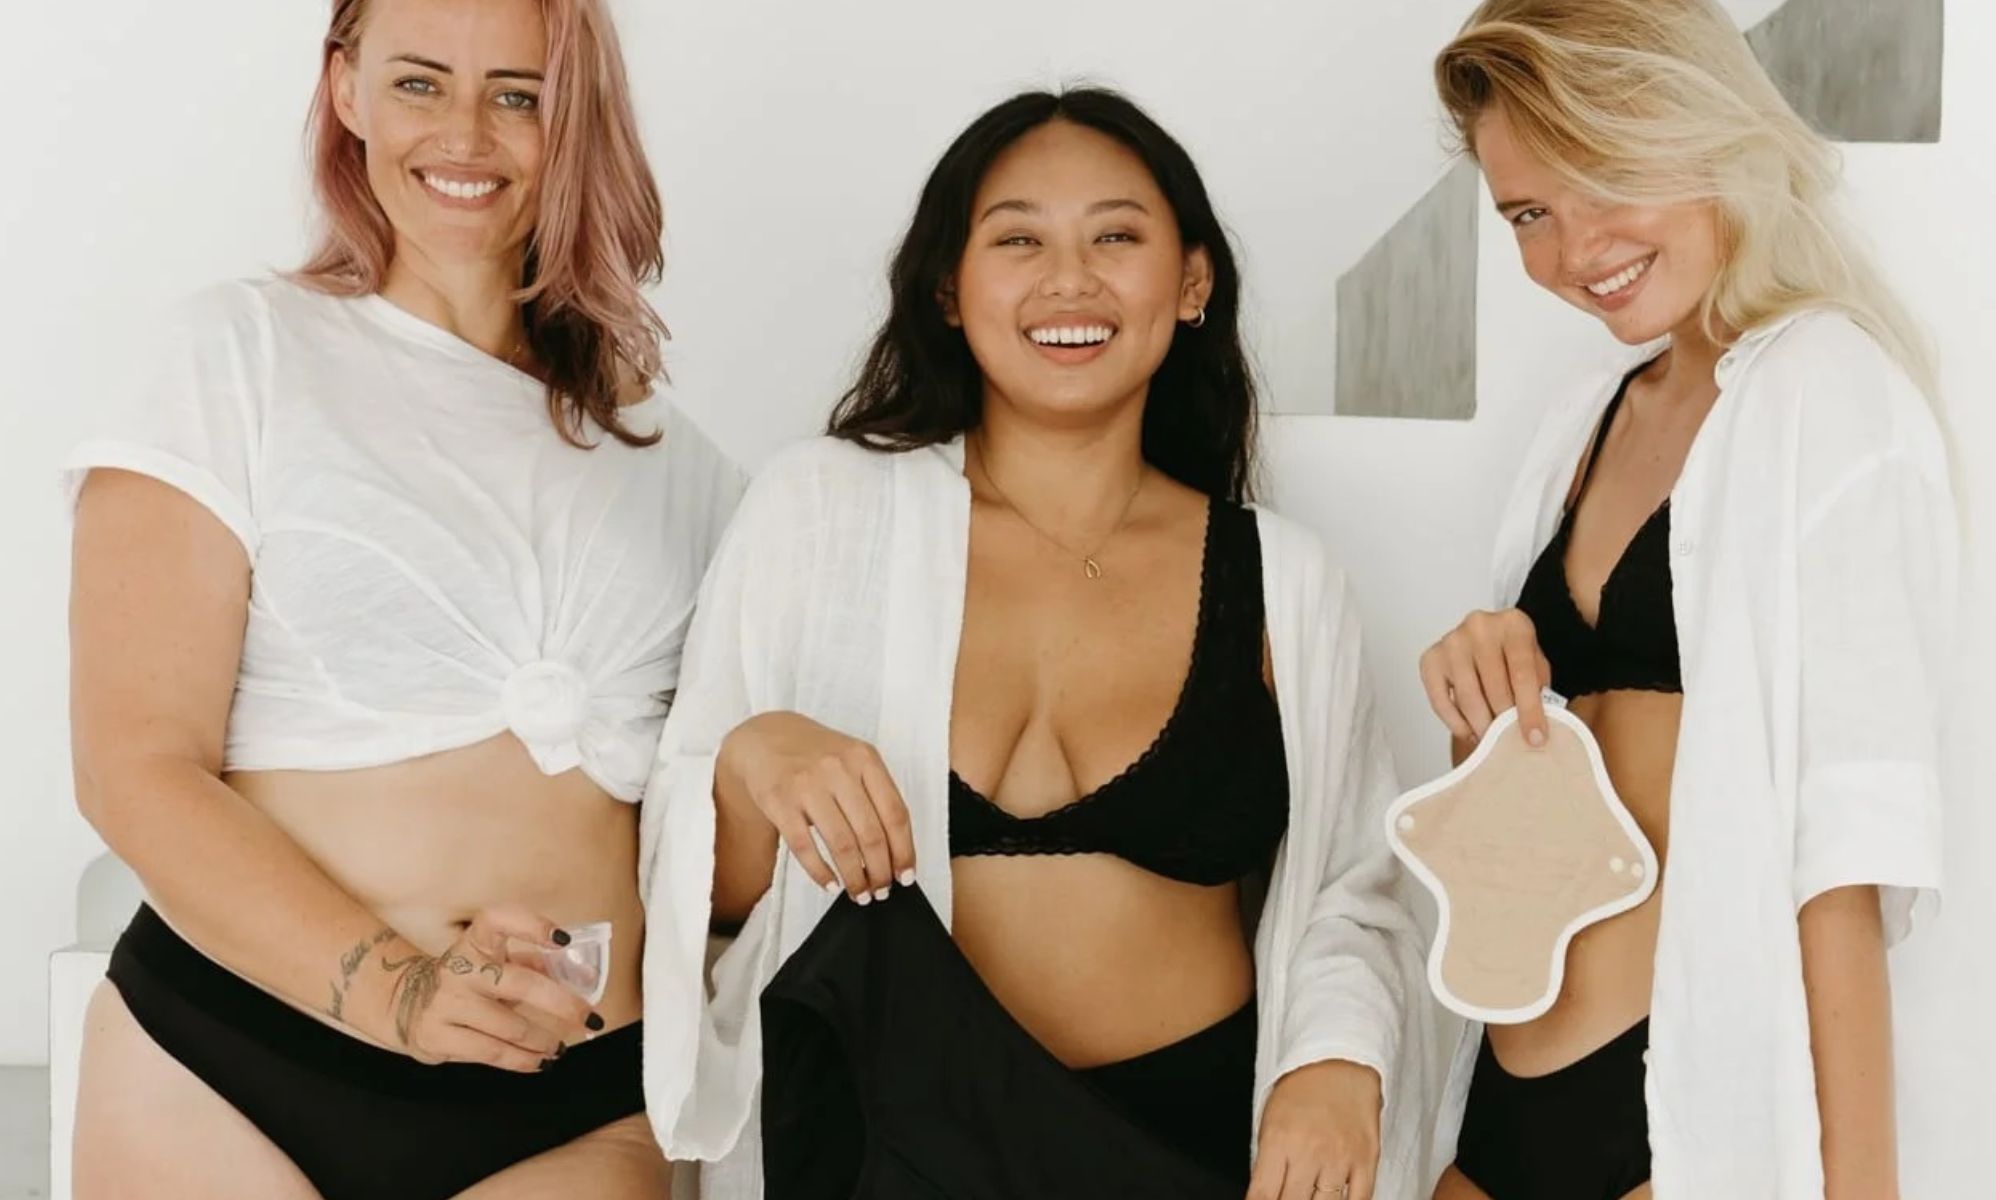 JuJu is home to reusable period care that's healthier for the planet